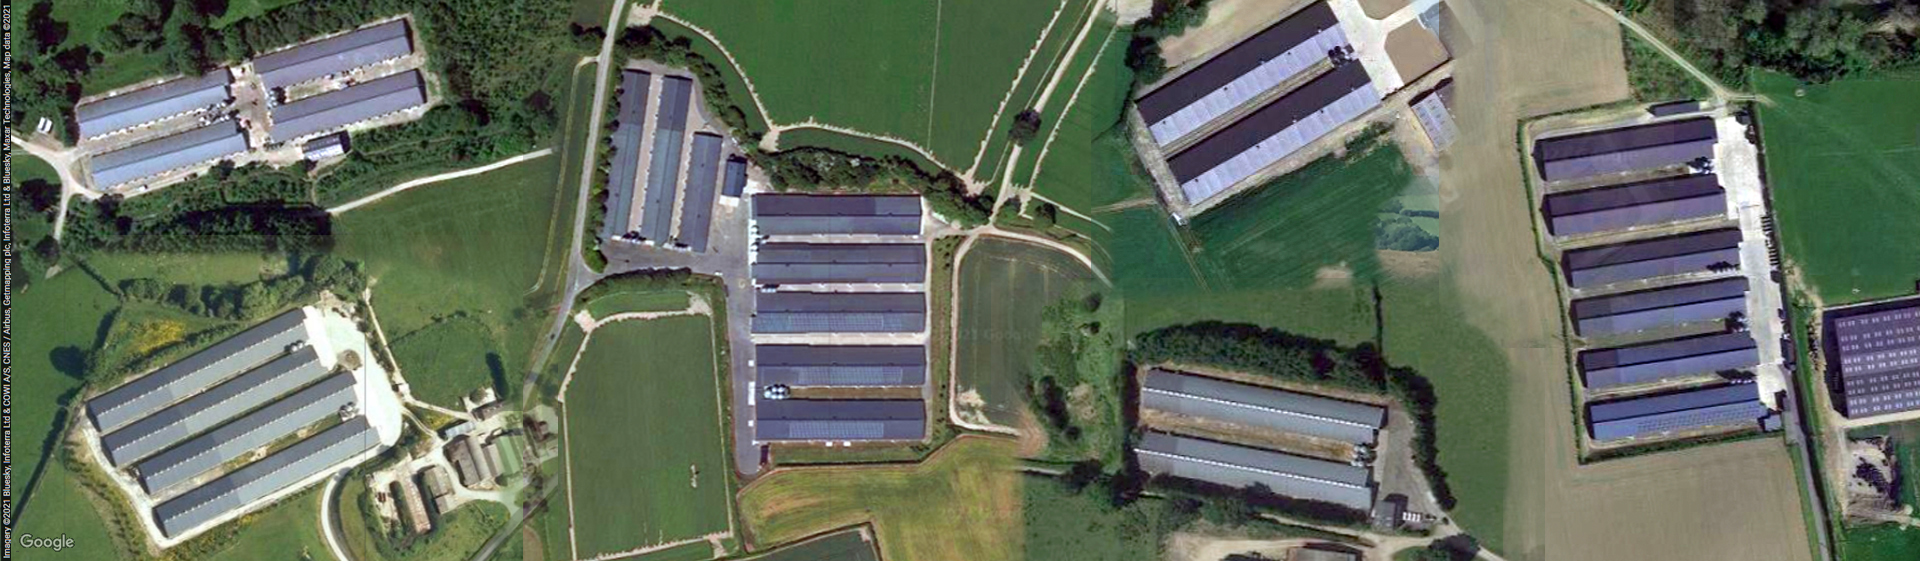 powys poultry units montage